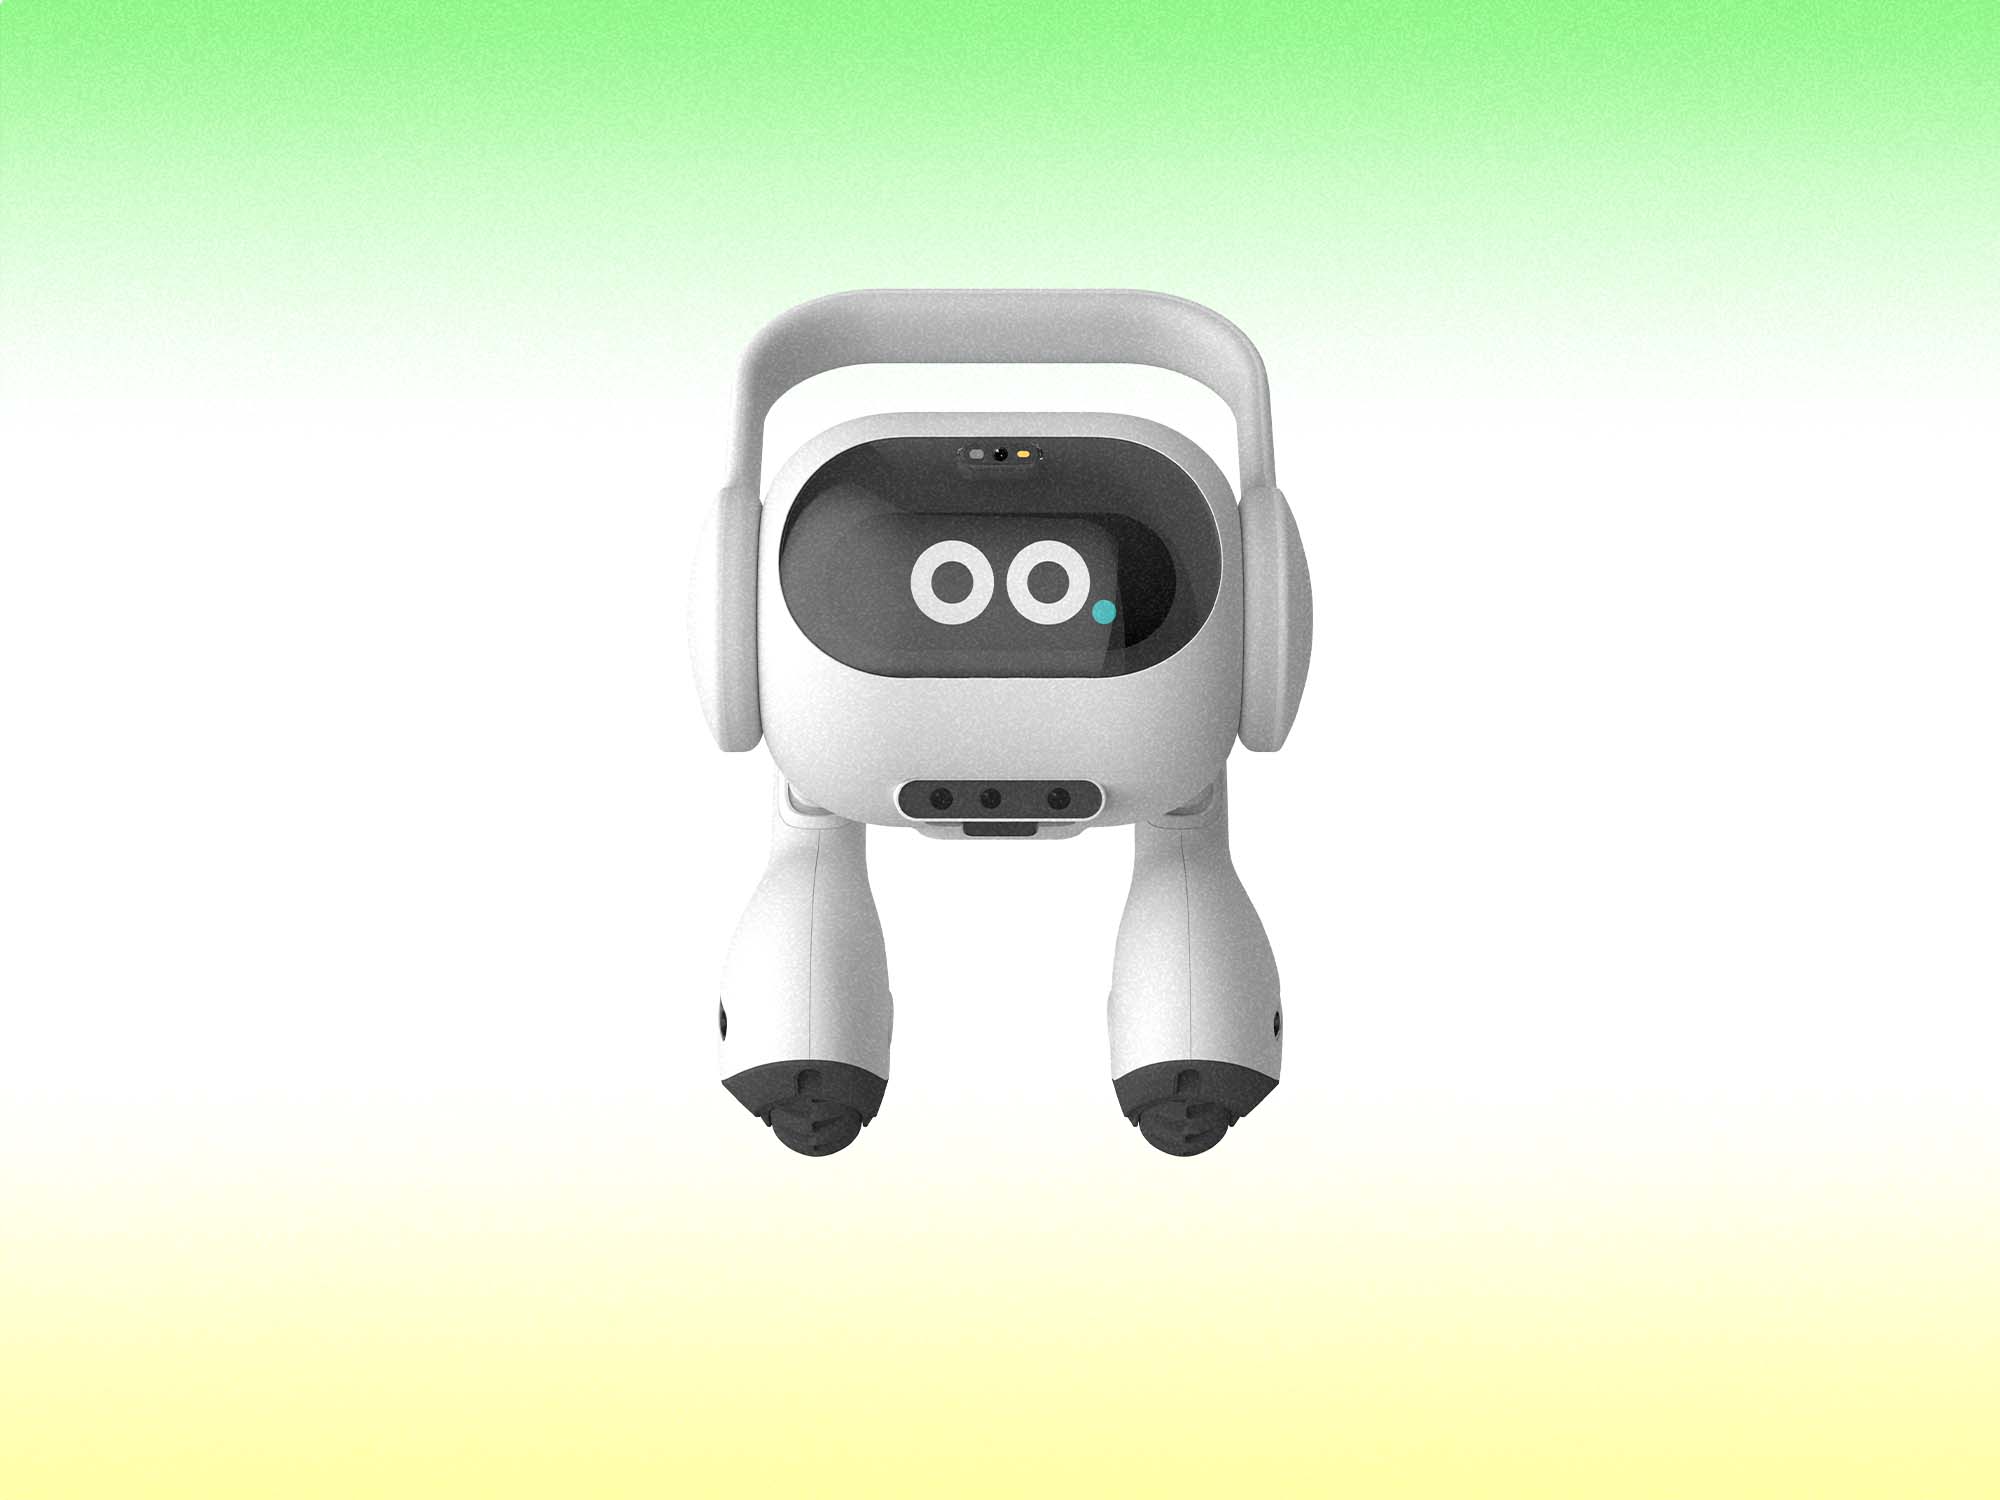 The LG AI home agent, which shows 'leg' like wheels and a white casing. It has digitally displayed 'eyes' on a black screen at the top.